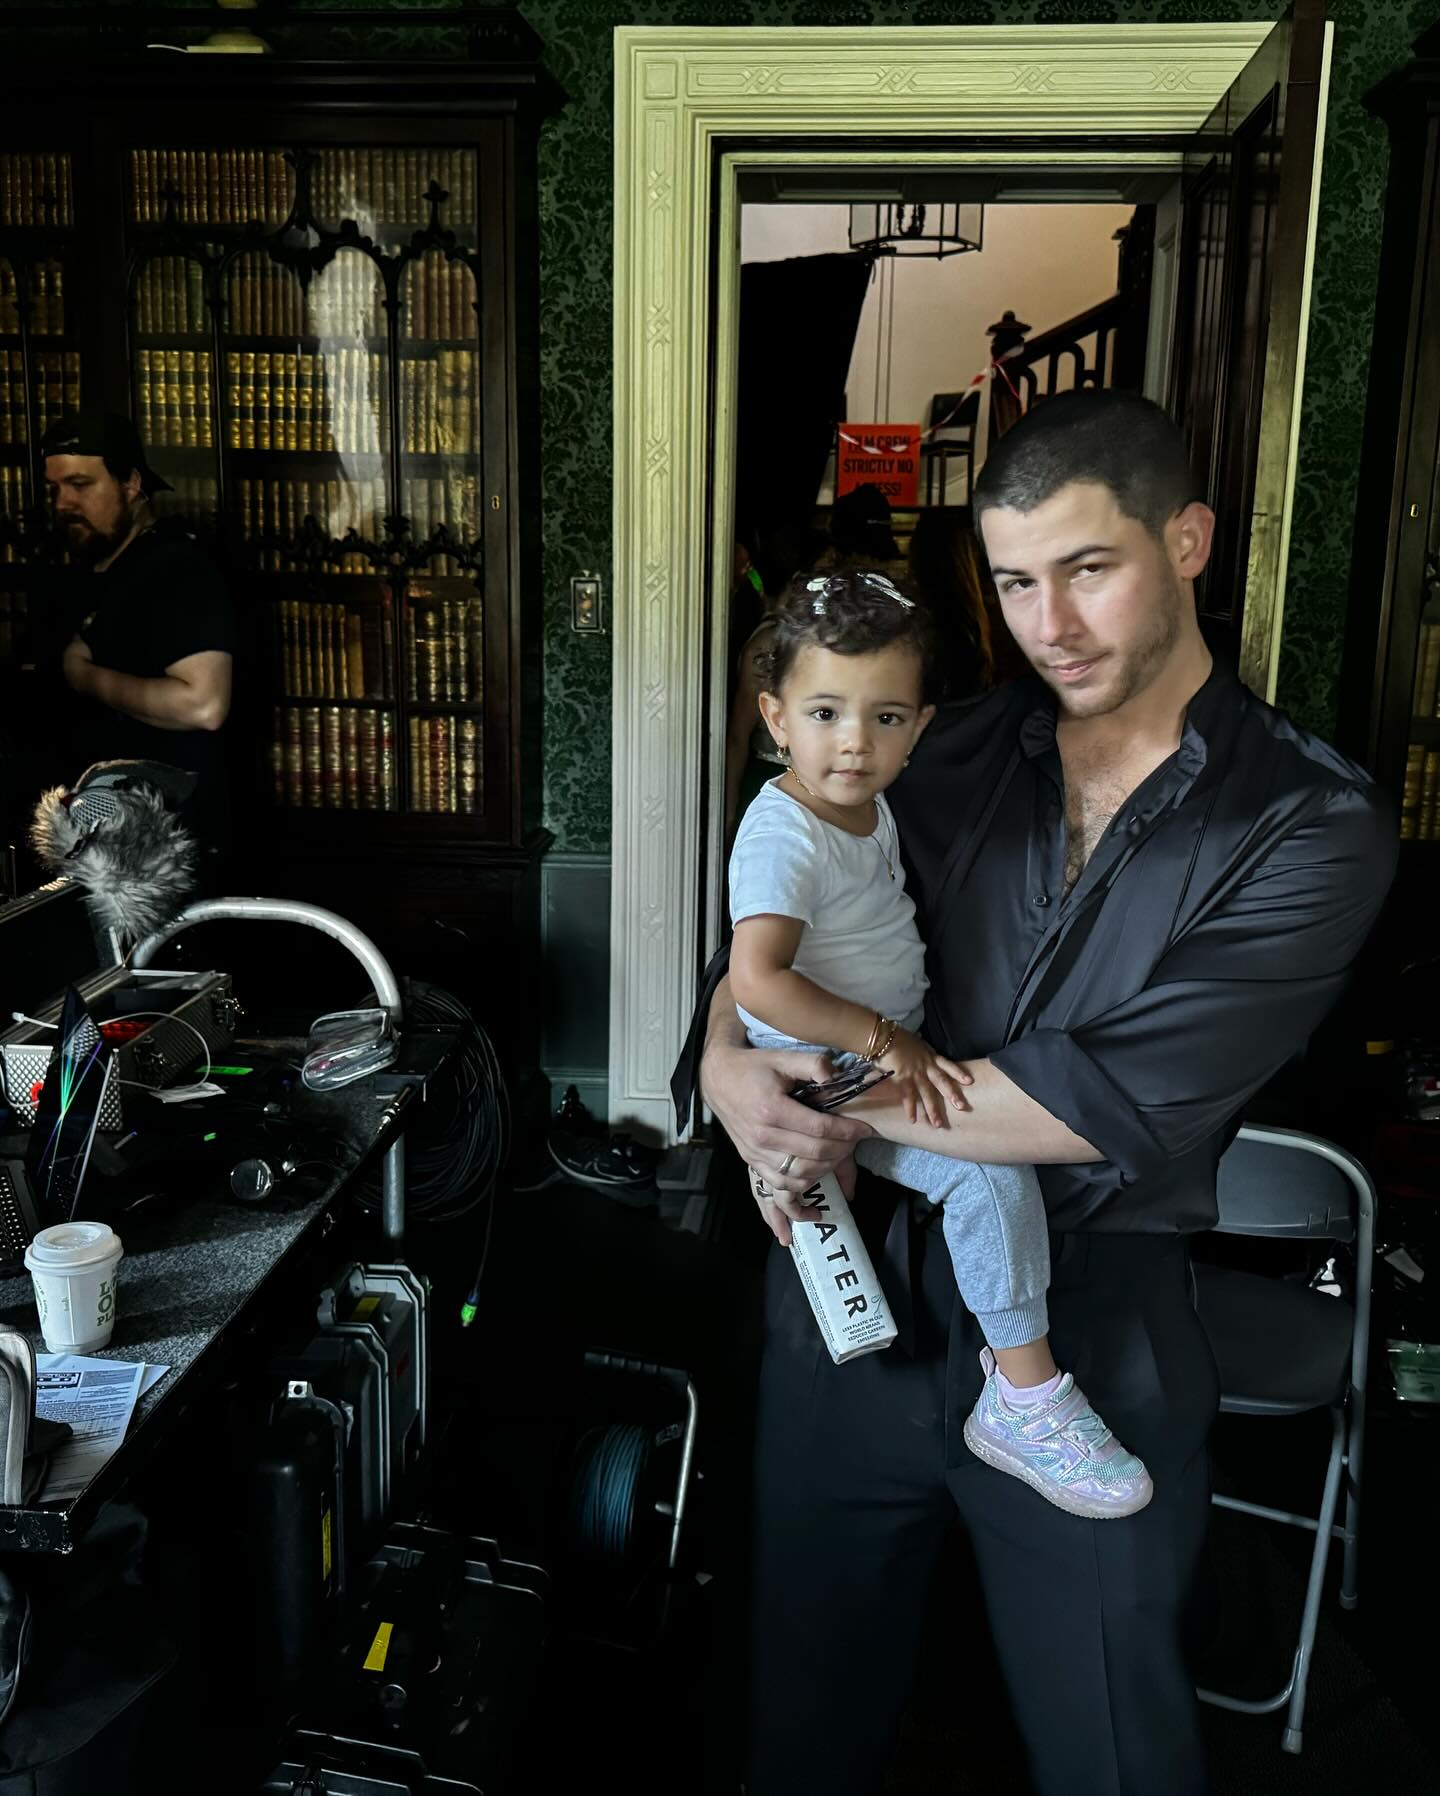 Nick Jonas showed off his new haircut while carrying his daughter Malti